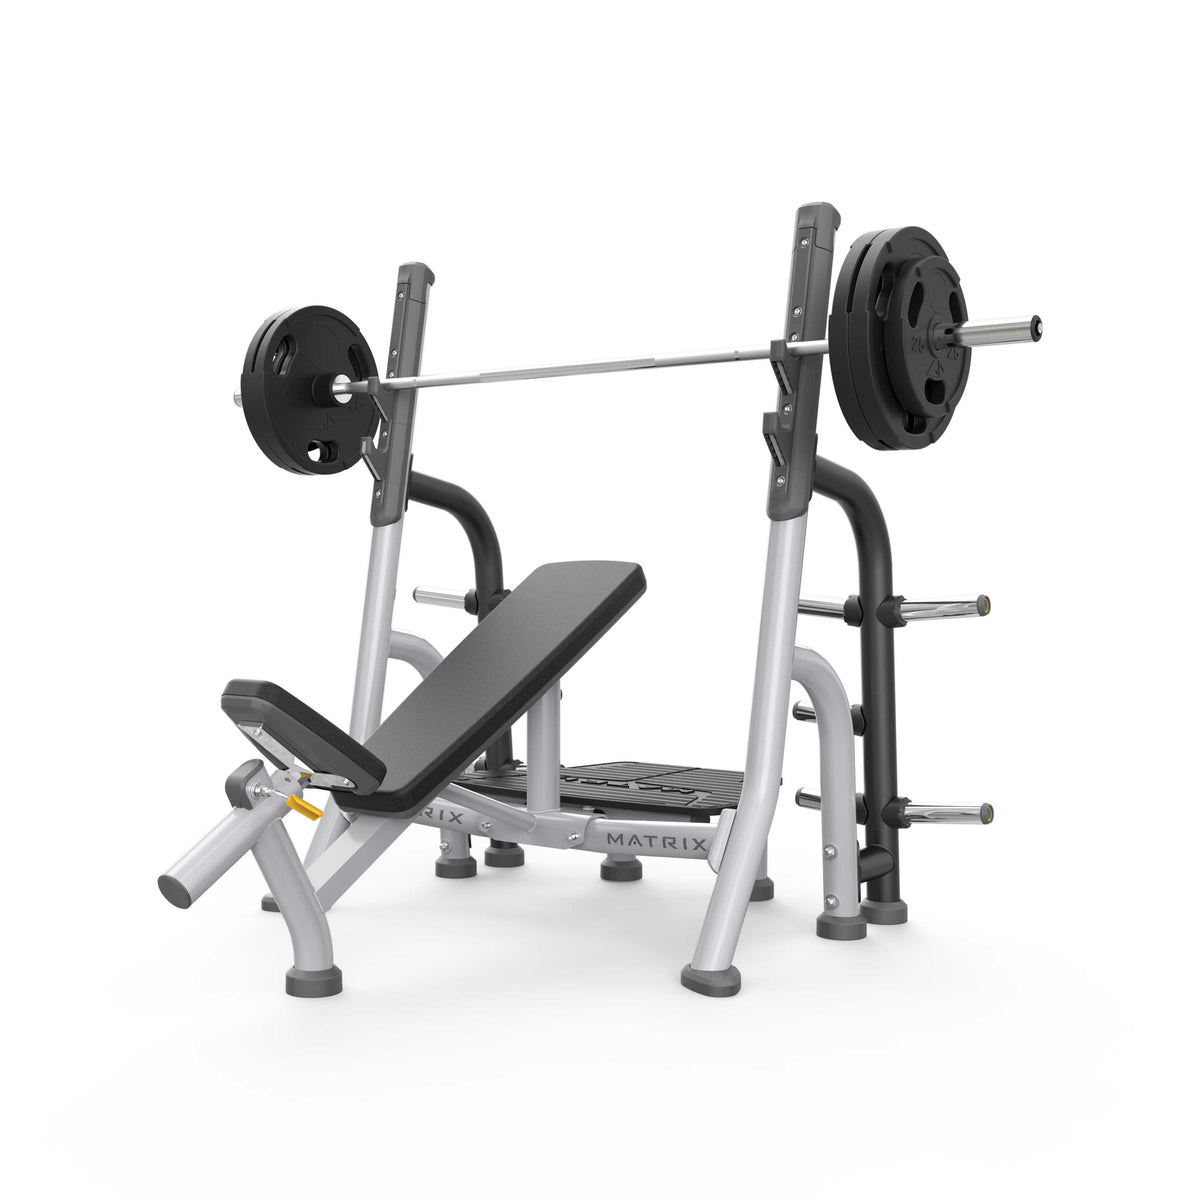 Matrix Fitness Magnum Olympic Incline Bench full view | Fitness Experience